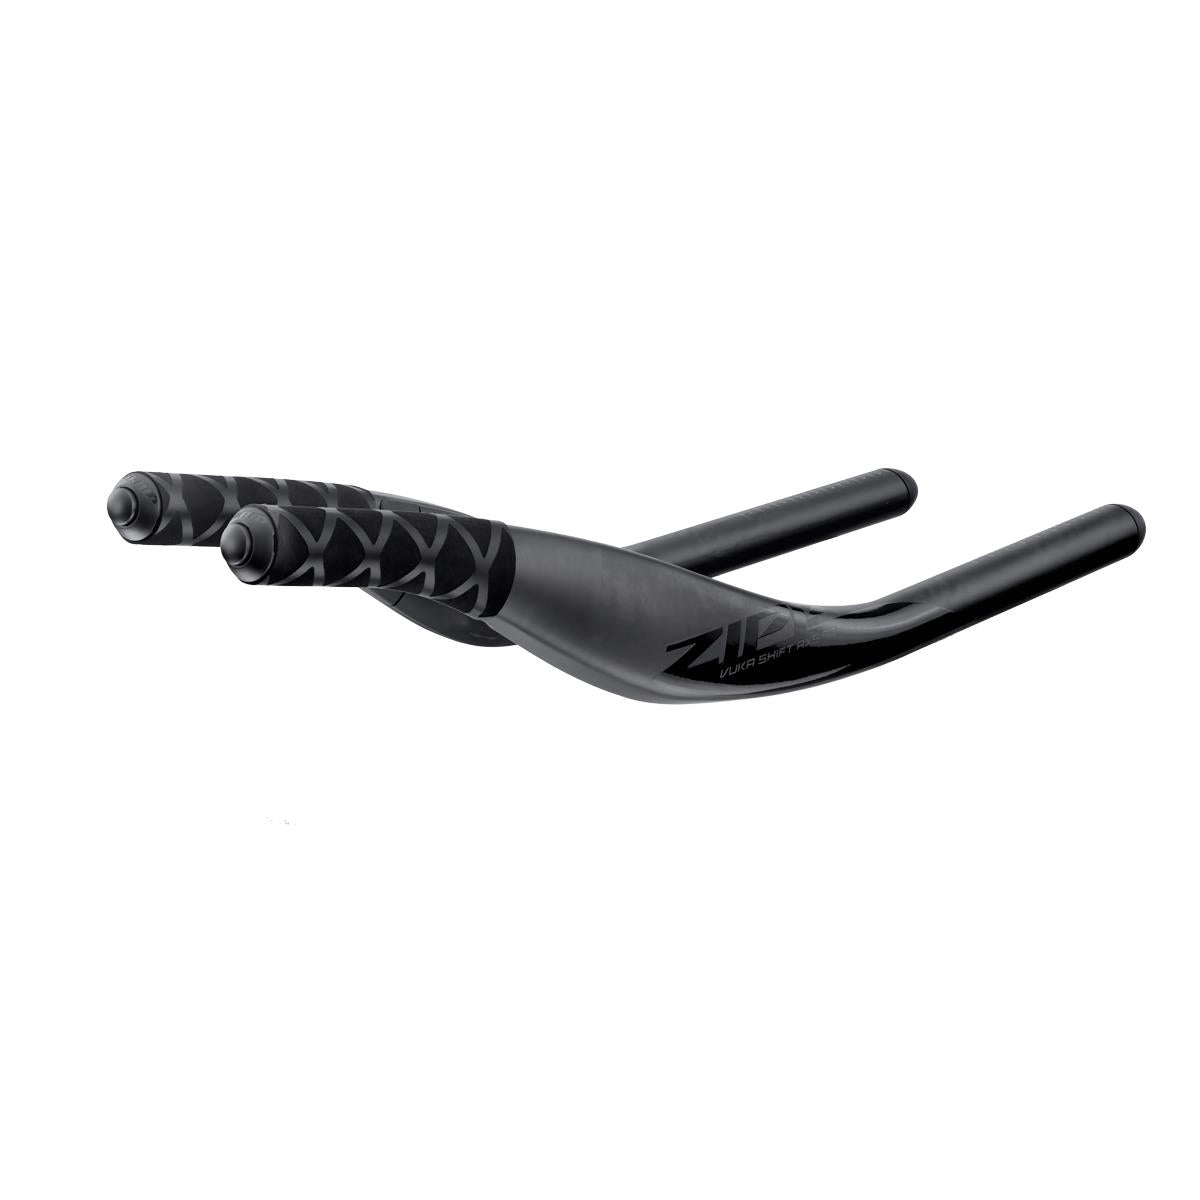 Zipp Electronic Controller Vuka Shift Axs 90 Carbon Extension 22.2Mm Pair Left/Right (Includes 800Mm Multiclic Pair) A1